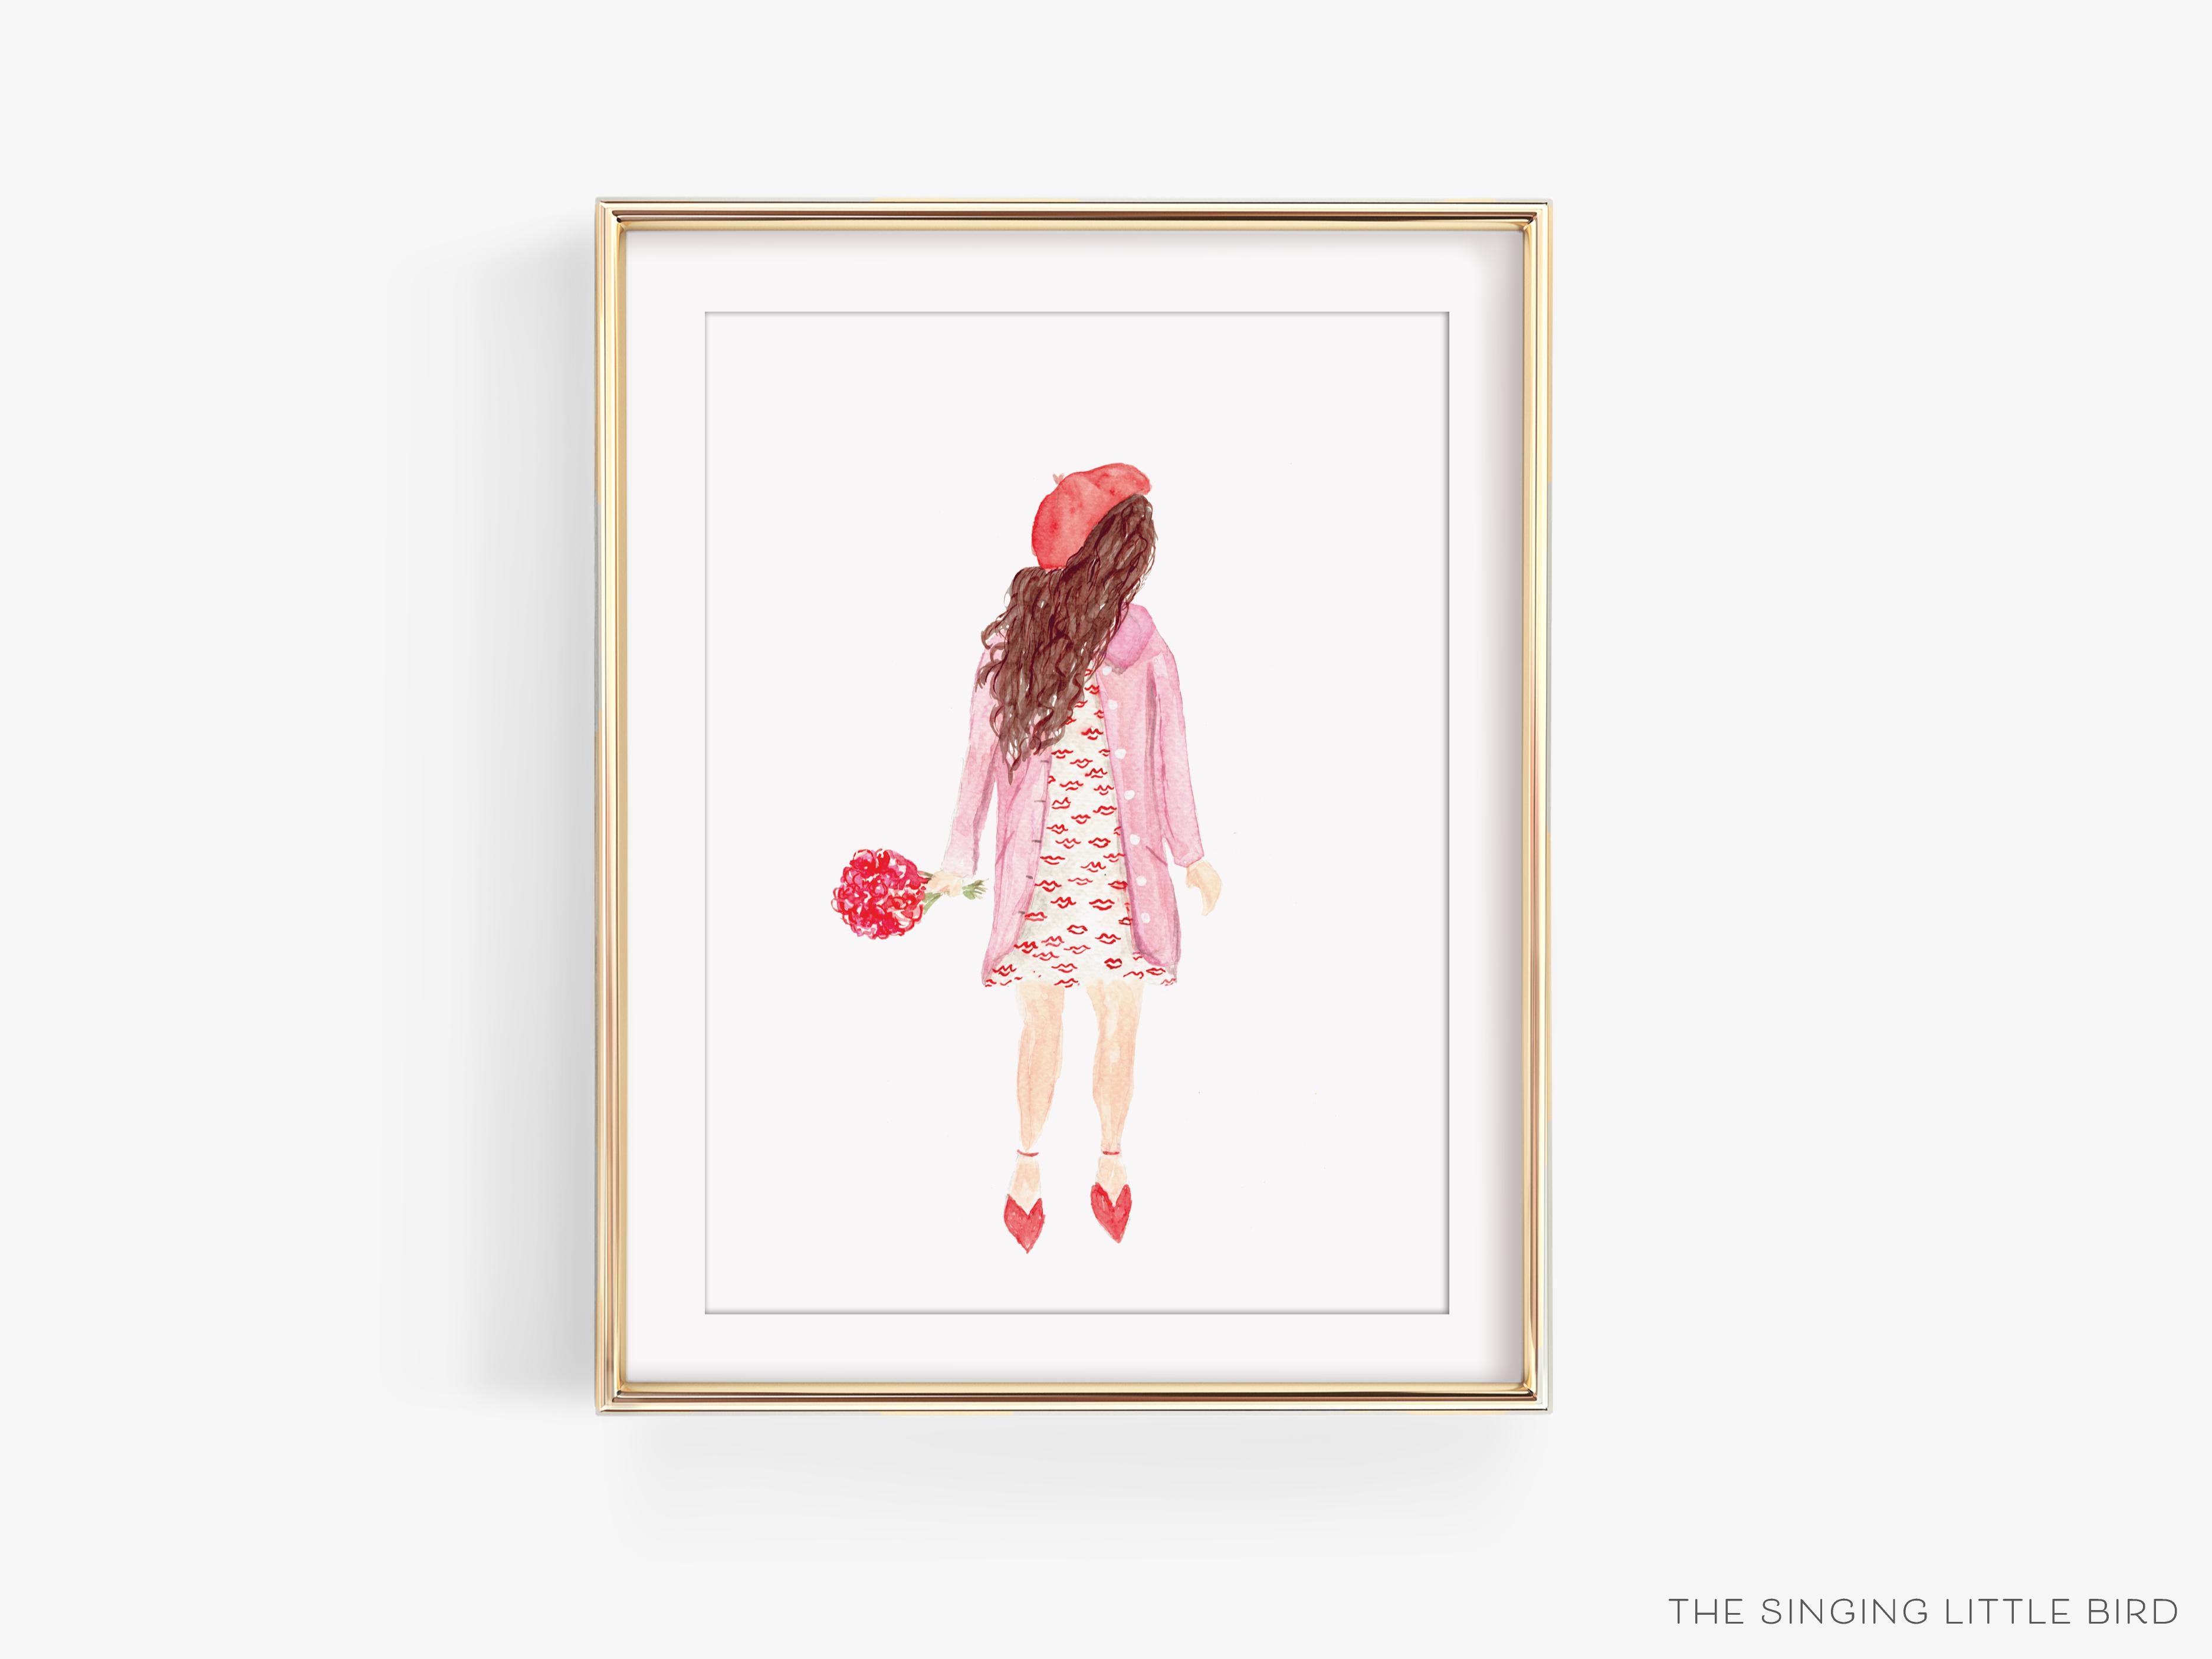 Kiss Dress Girl Art Print-This watercolor art print features our hand-painted girl and flowers, printed in the USA on 120lb high quality art paper. This makes a great gift or wall decor for the fashionista lover in your life.-The Singing Little Bird